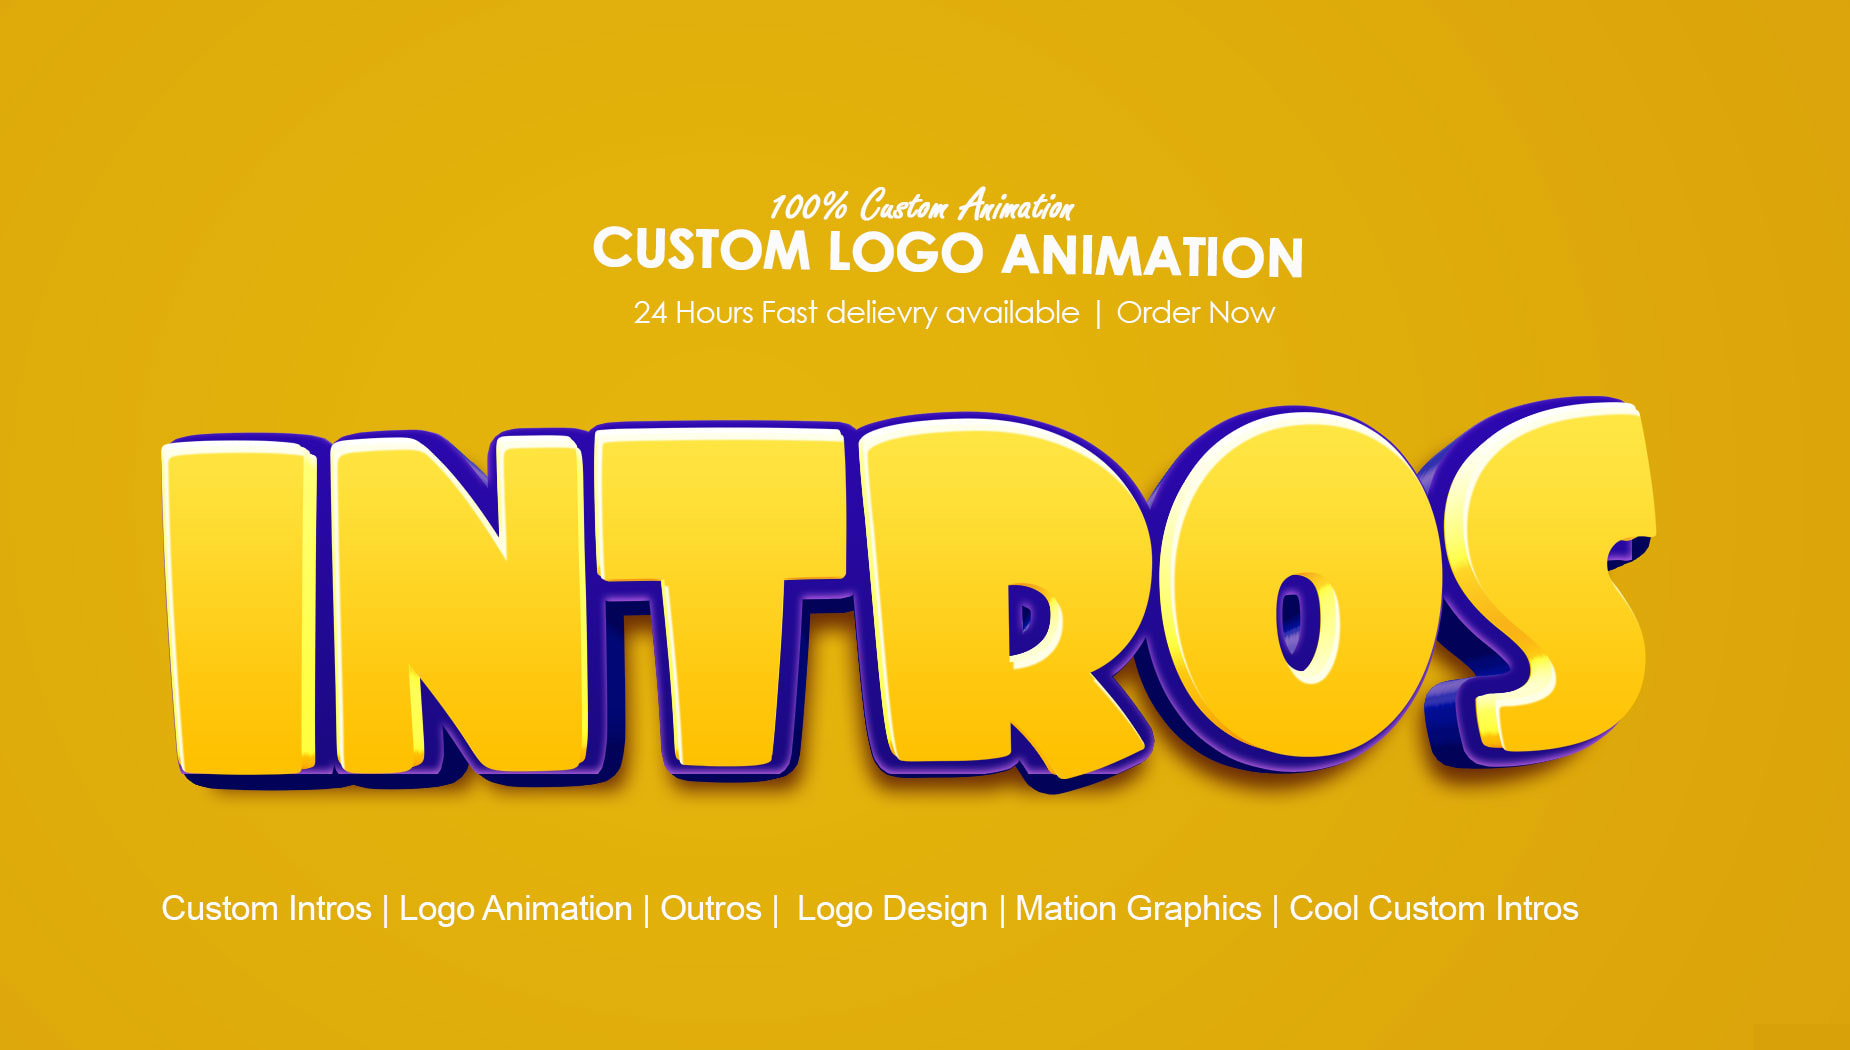 Do a modern custom logo animation in after effects by Omaimakhan | Fiverr